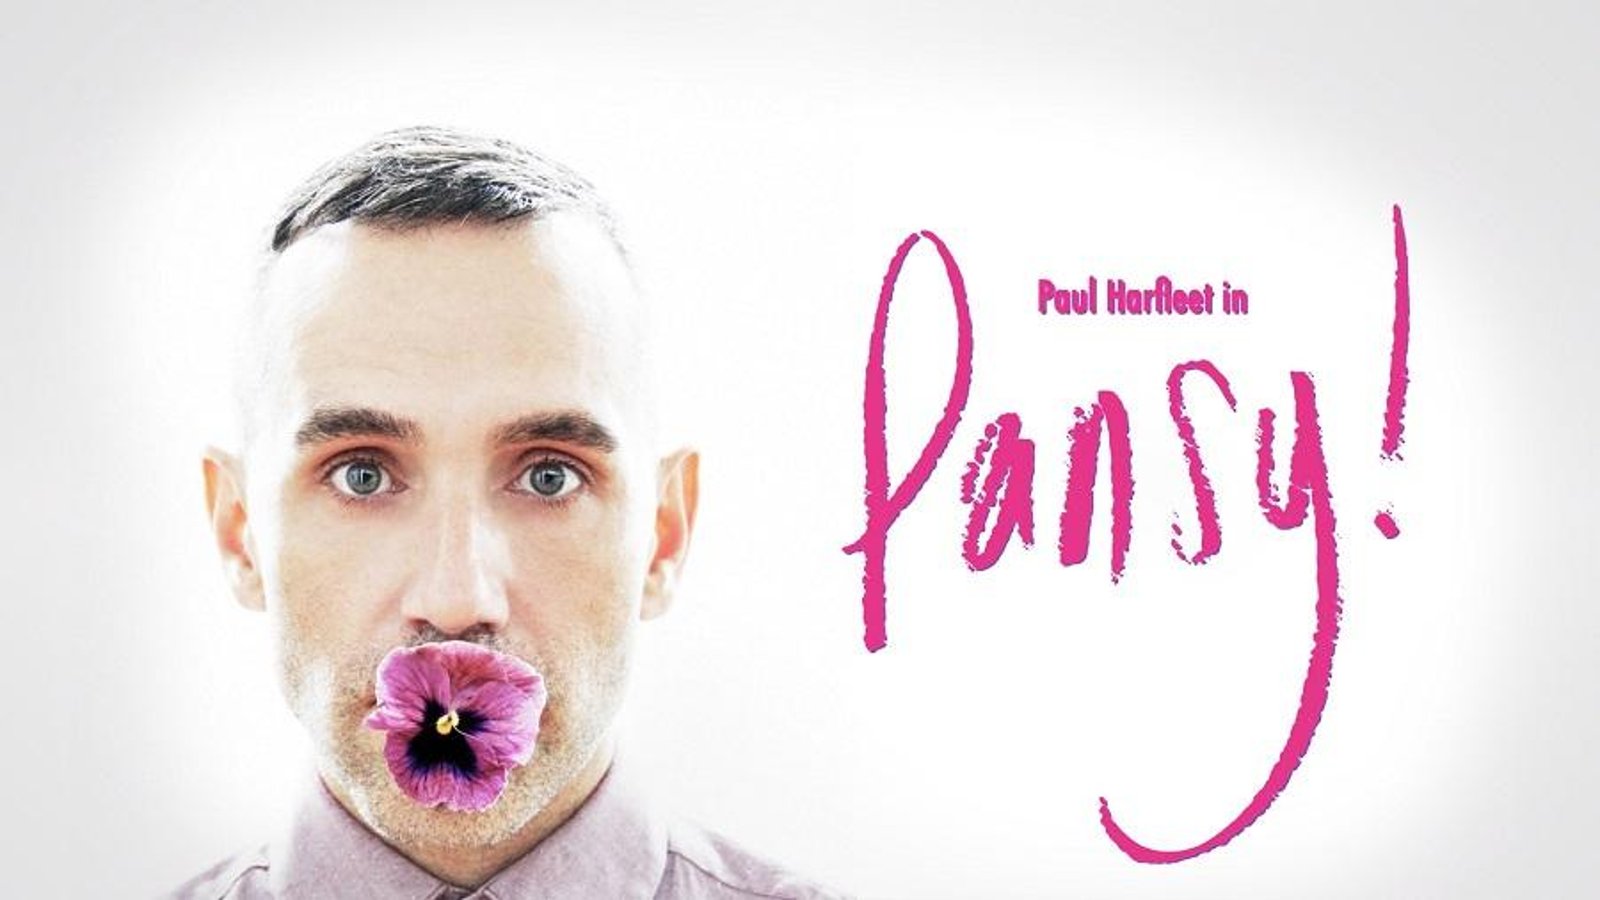 Pansy! - The Life and Work of Artist Paul Harfleet